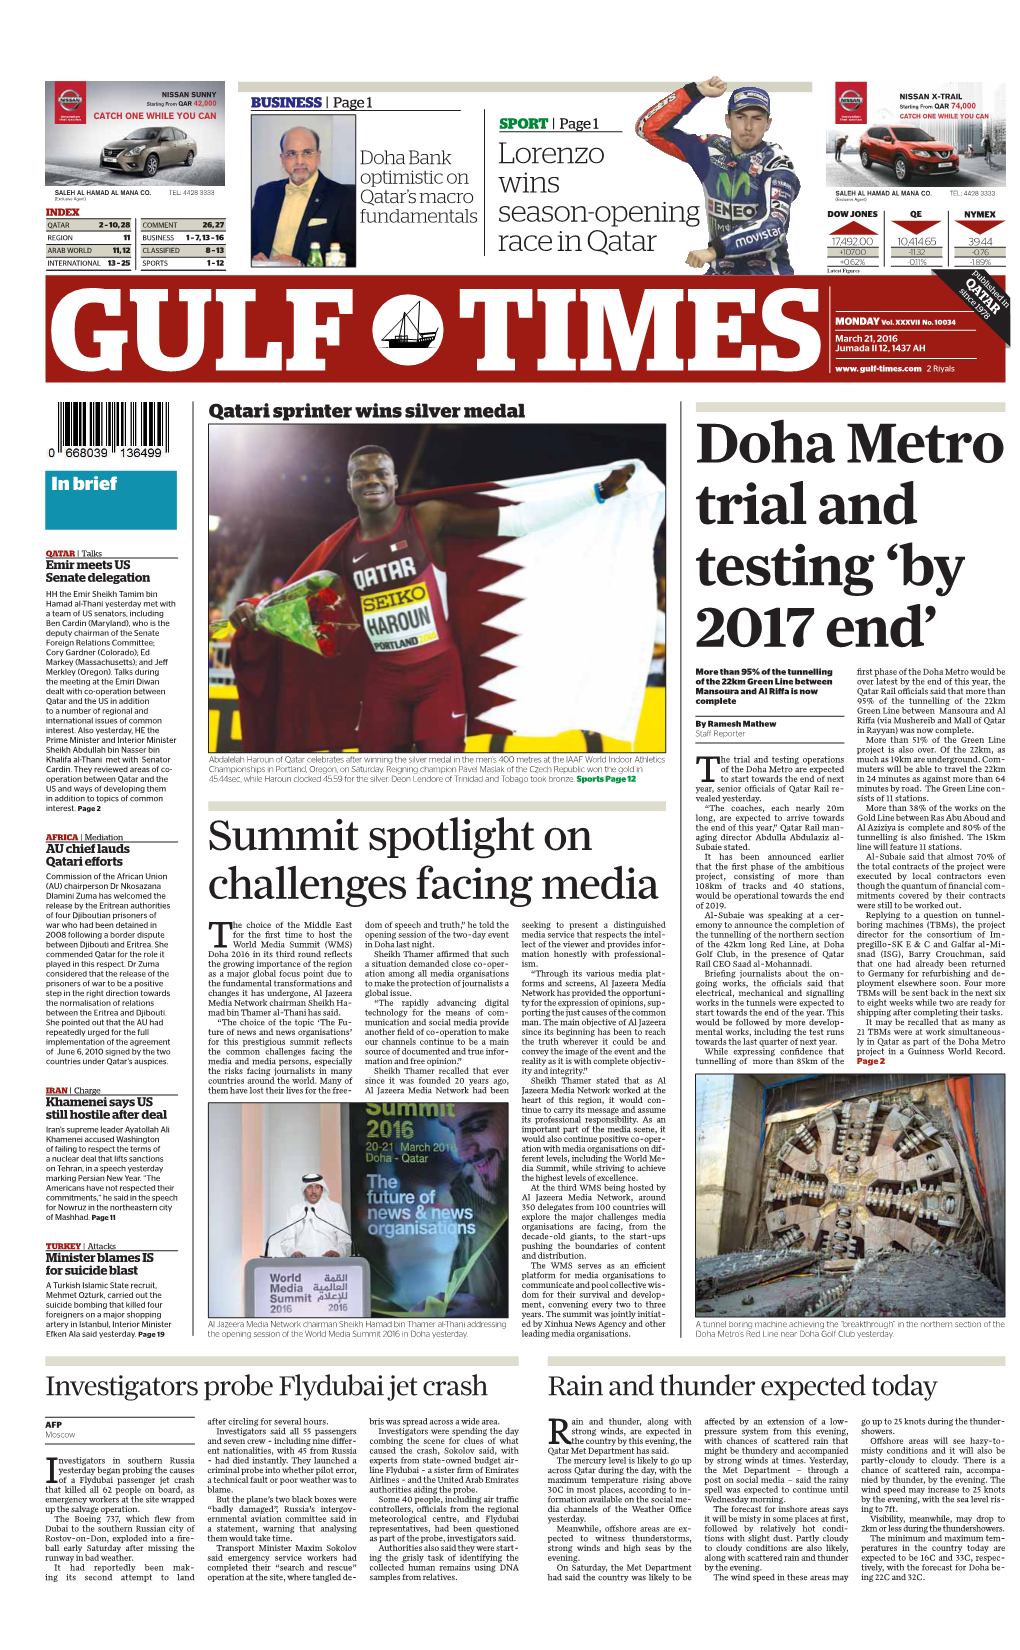 Doha Metro Trial and Testing 'By 2017 End'